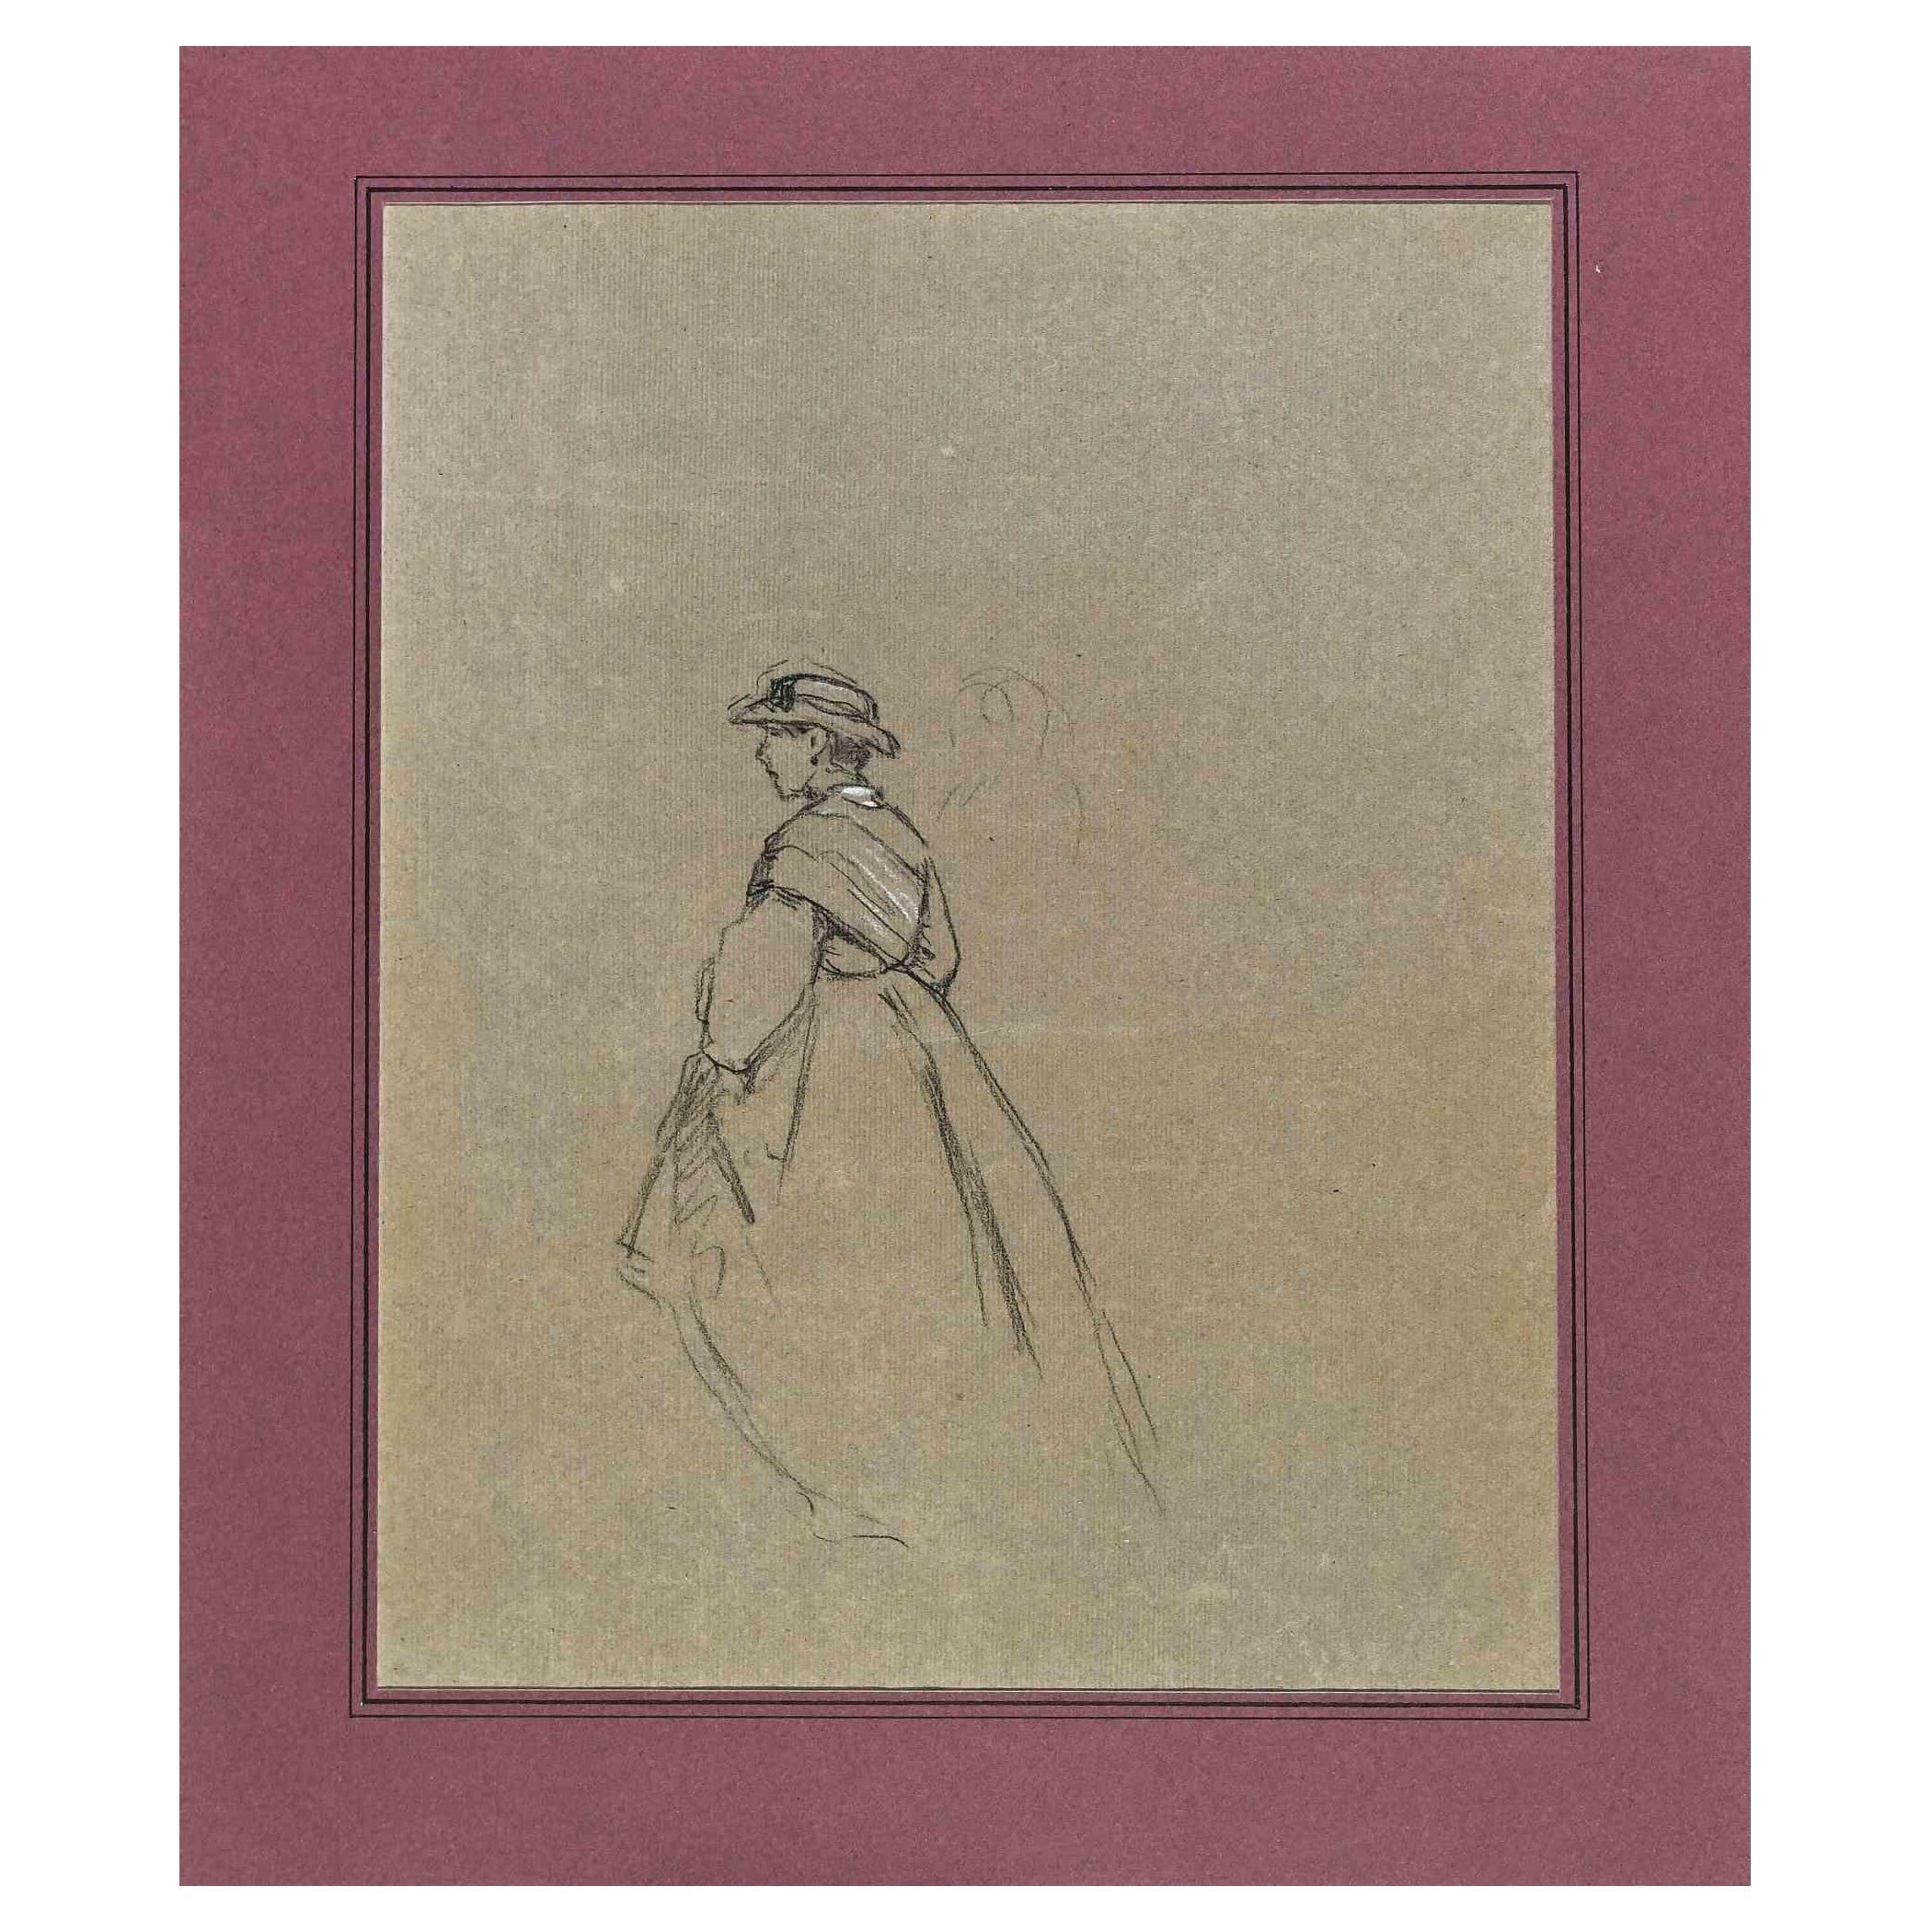  Figures - Original Drawing on Paper by Ferdinand Chaigneau - Mid 19th Century